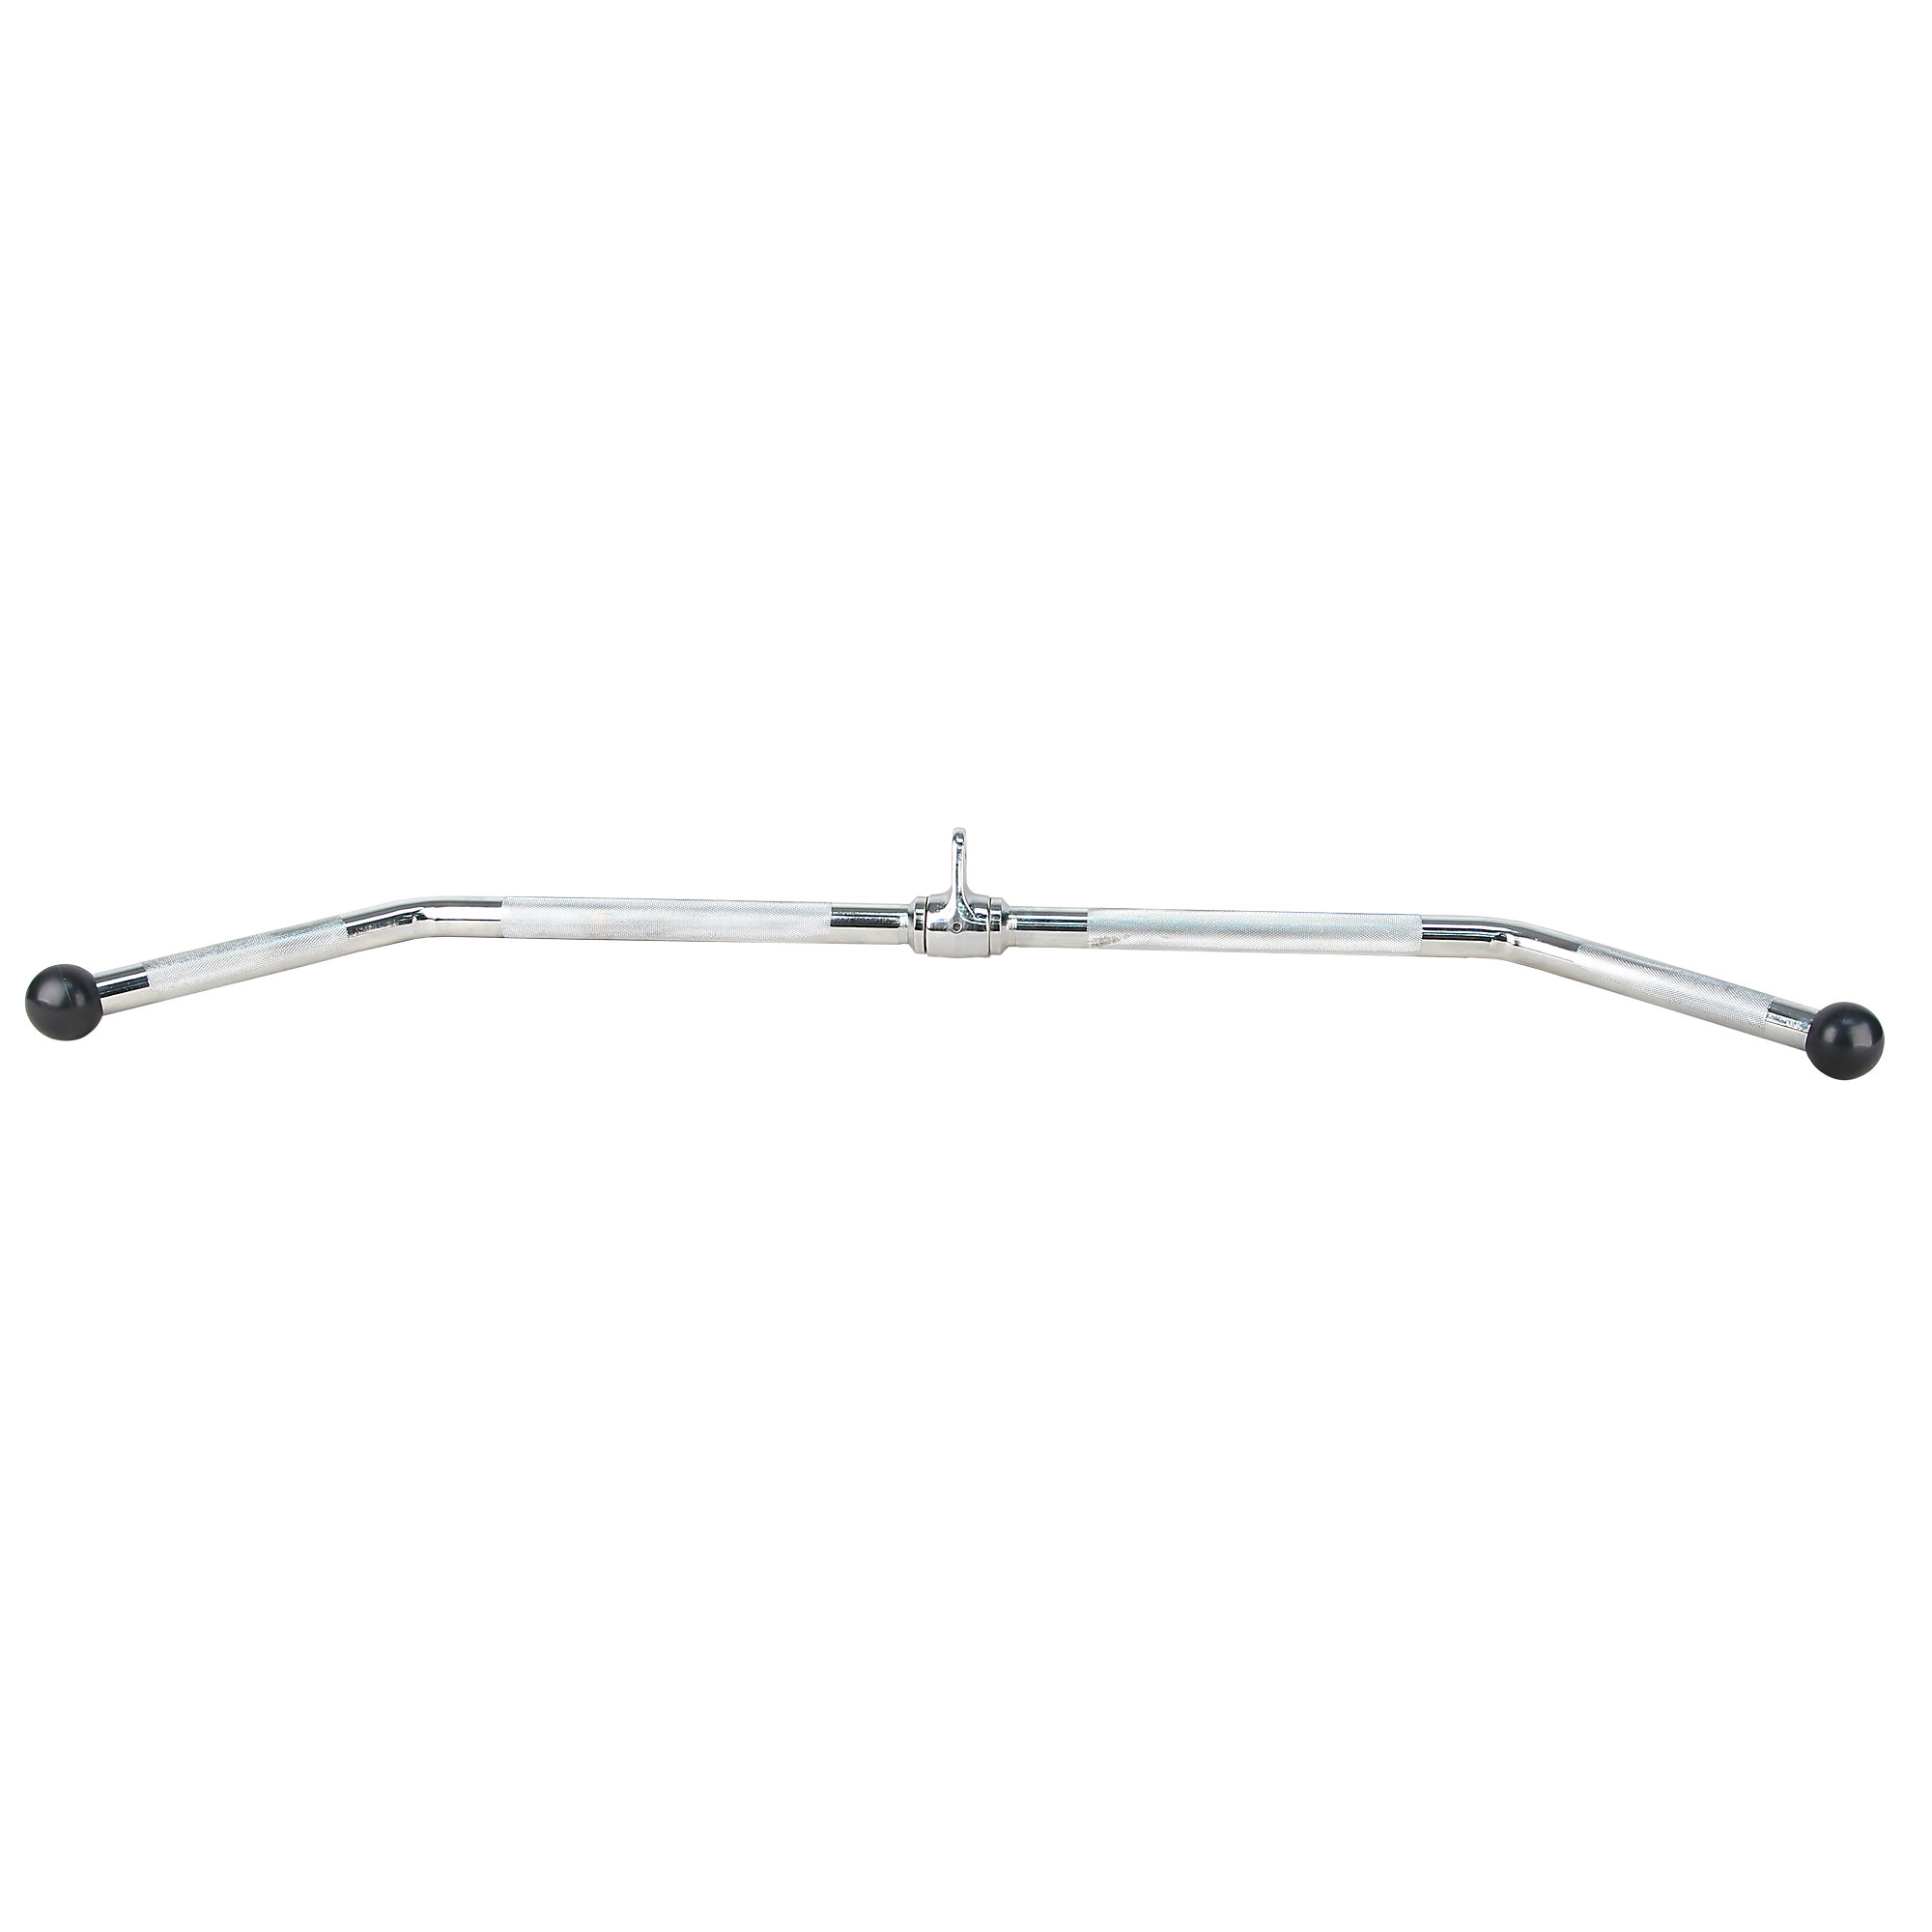 Attachment Bar, 41", Revolving Lat Bar with knurled grip area, Rubber Ends, Chrome